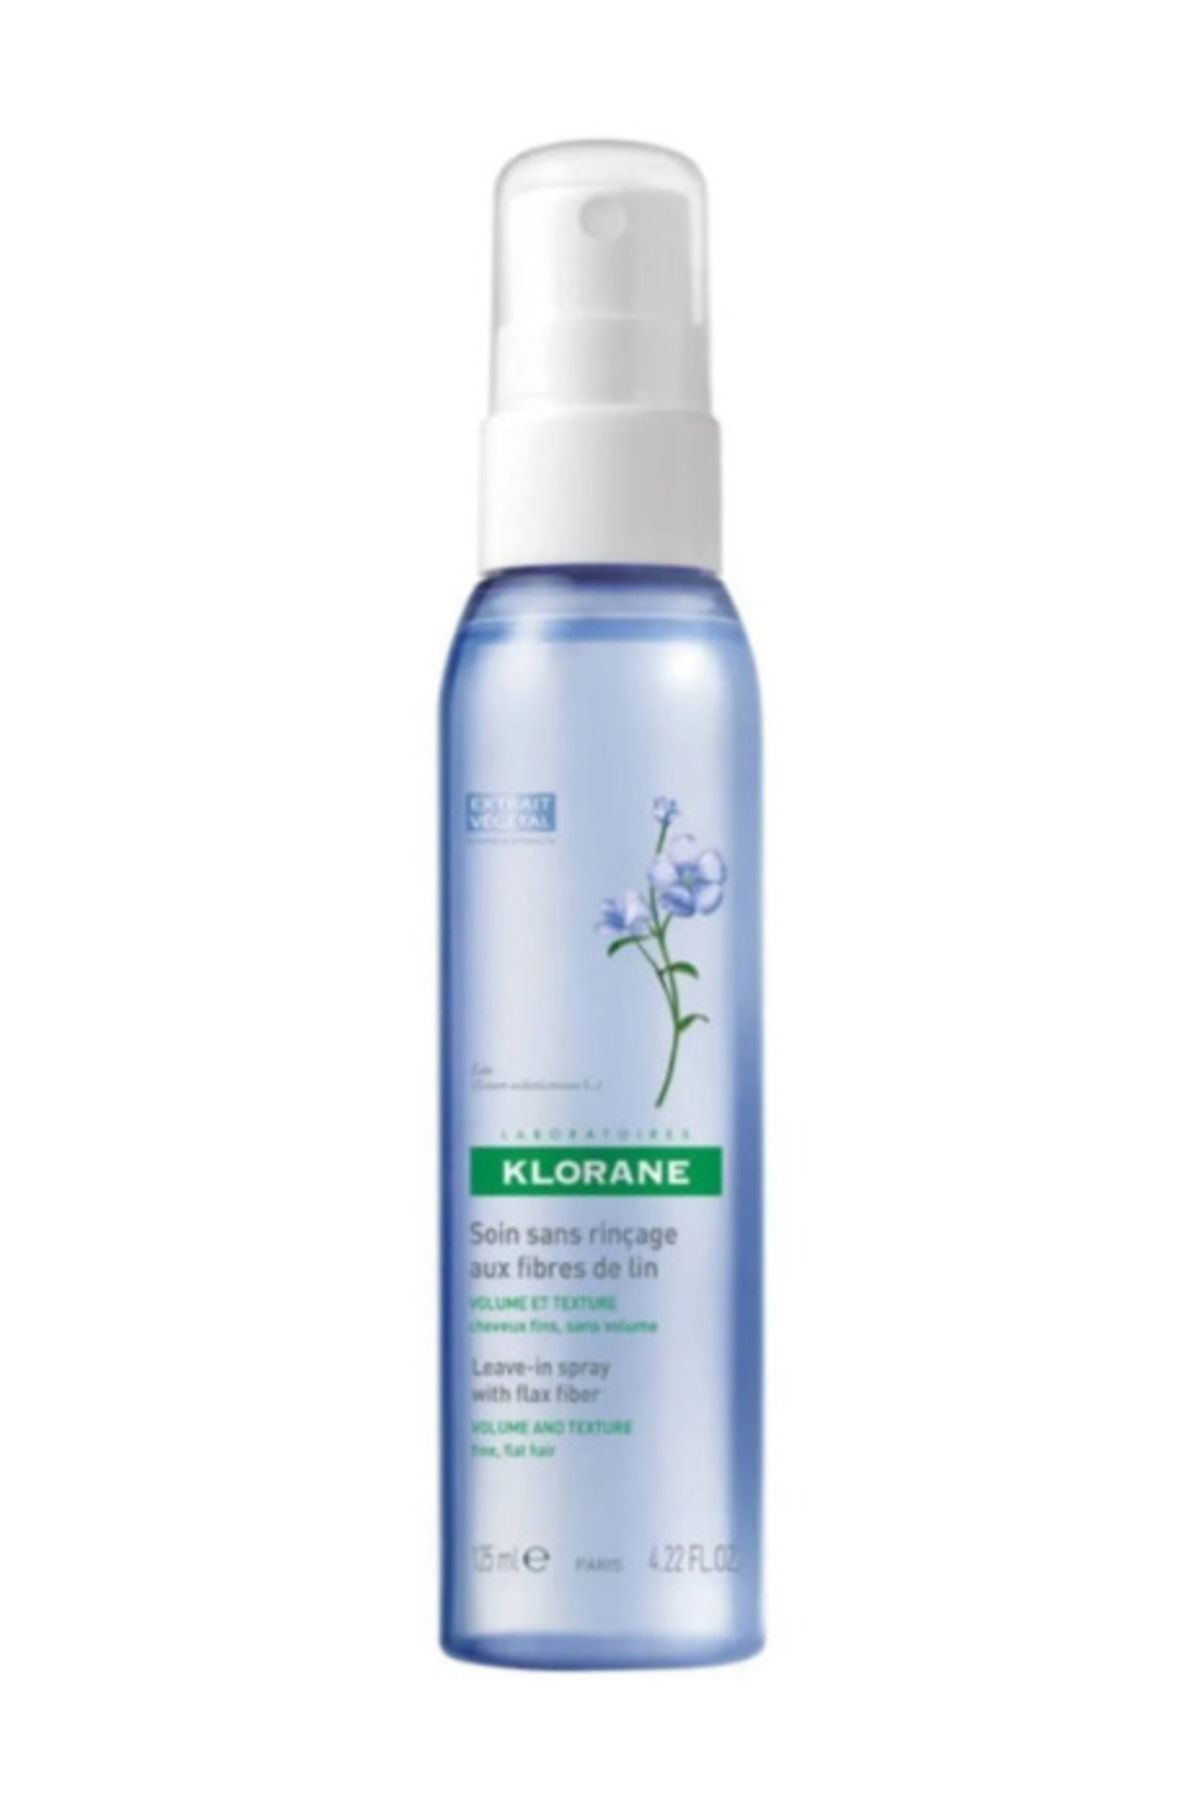 Klorane Leave-in Spray With Flax Fiber 125ml